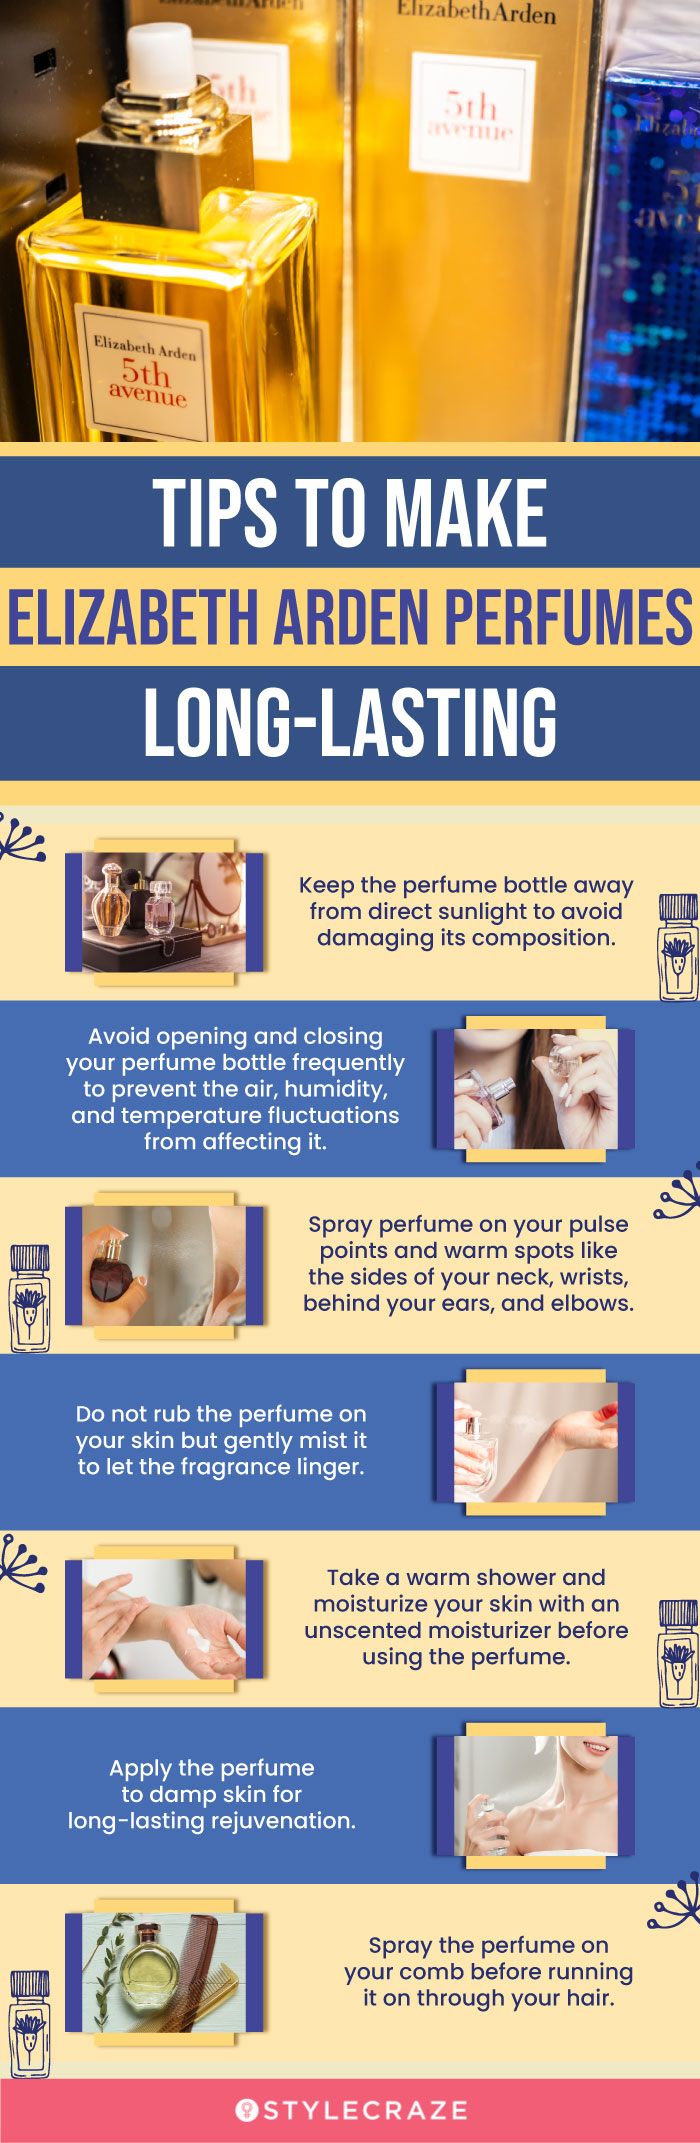 Tips To Make Elizabeth Arden Perfumes Long Lasting (infographic)